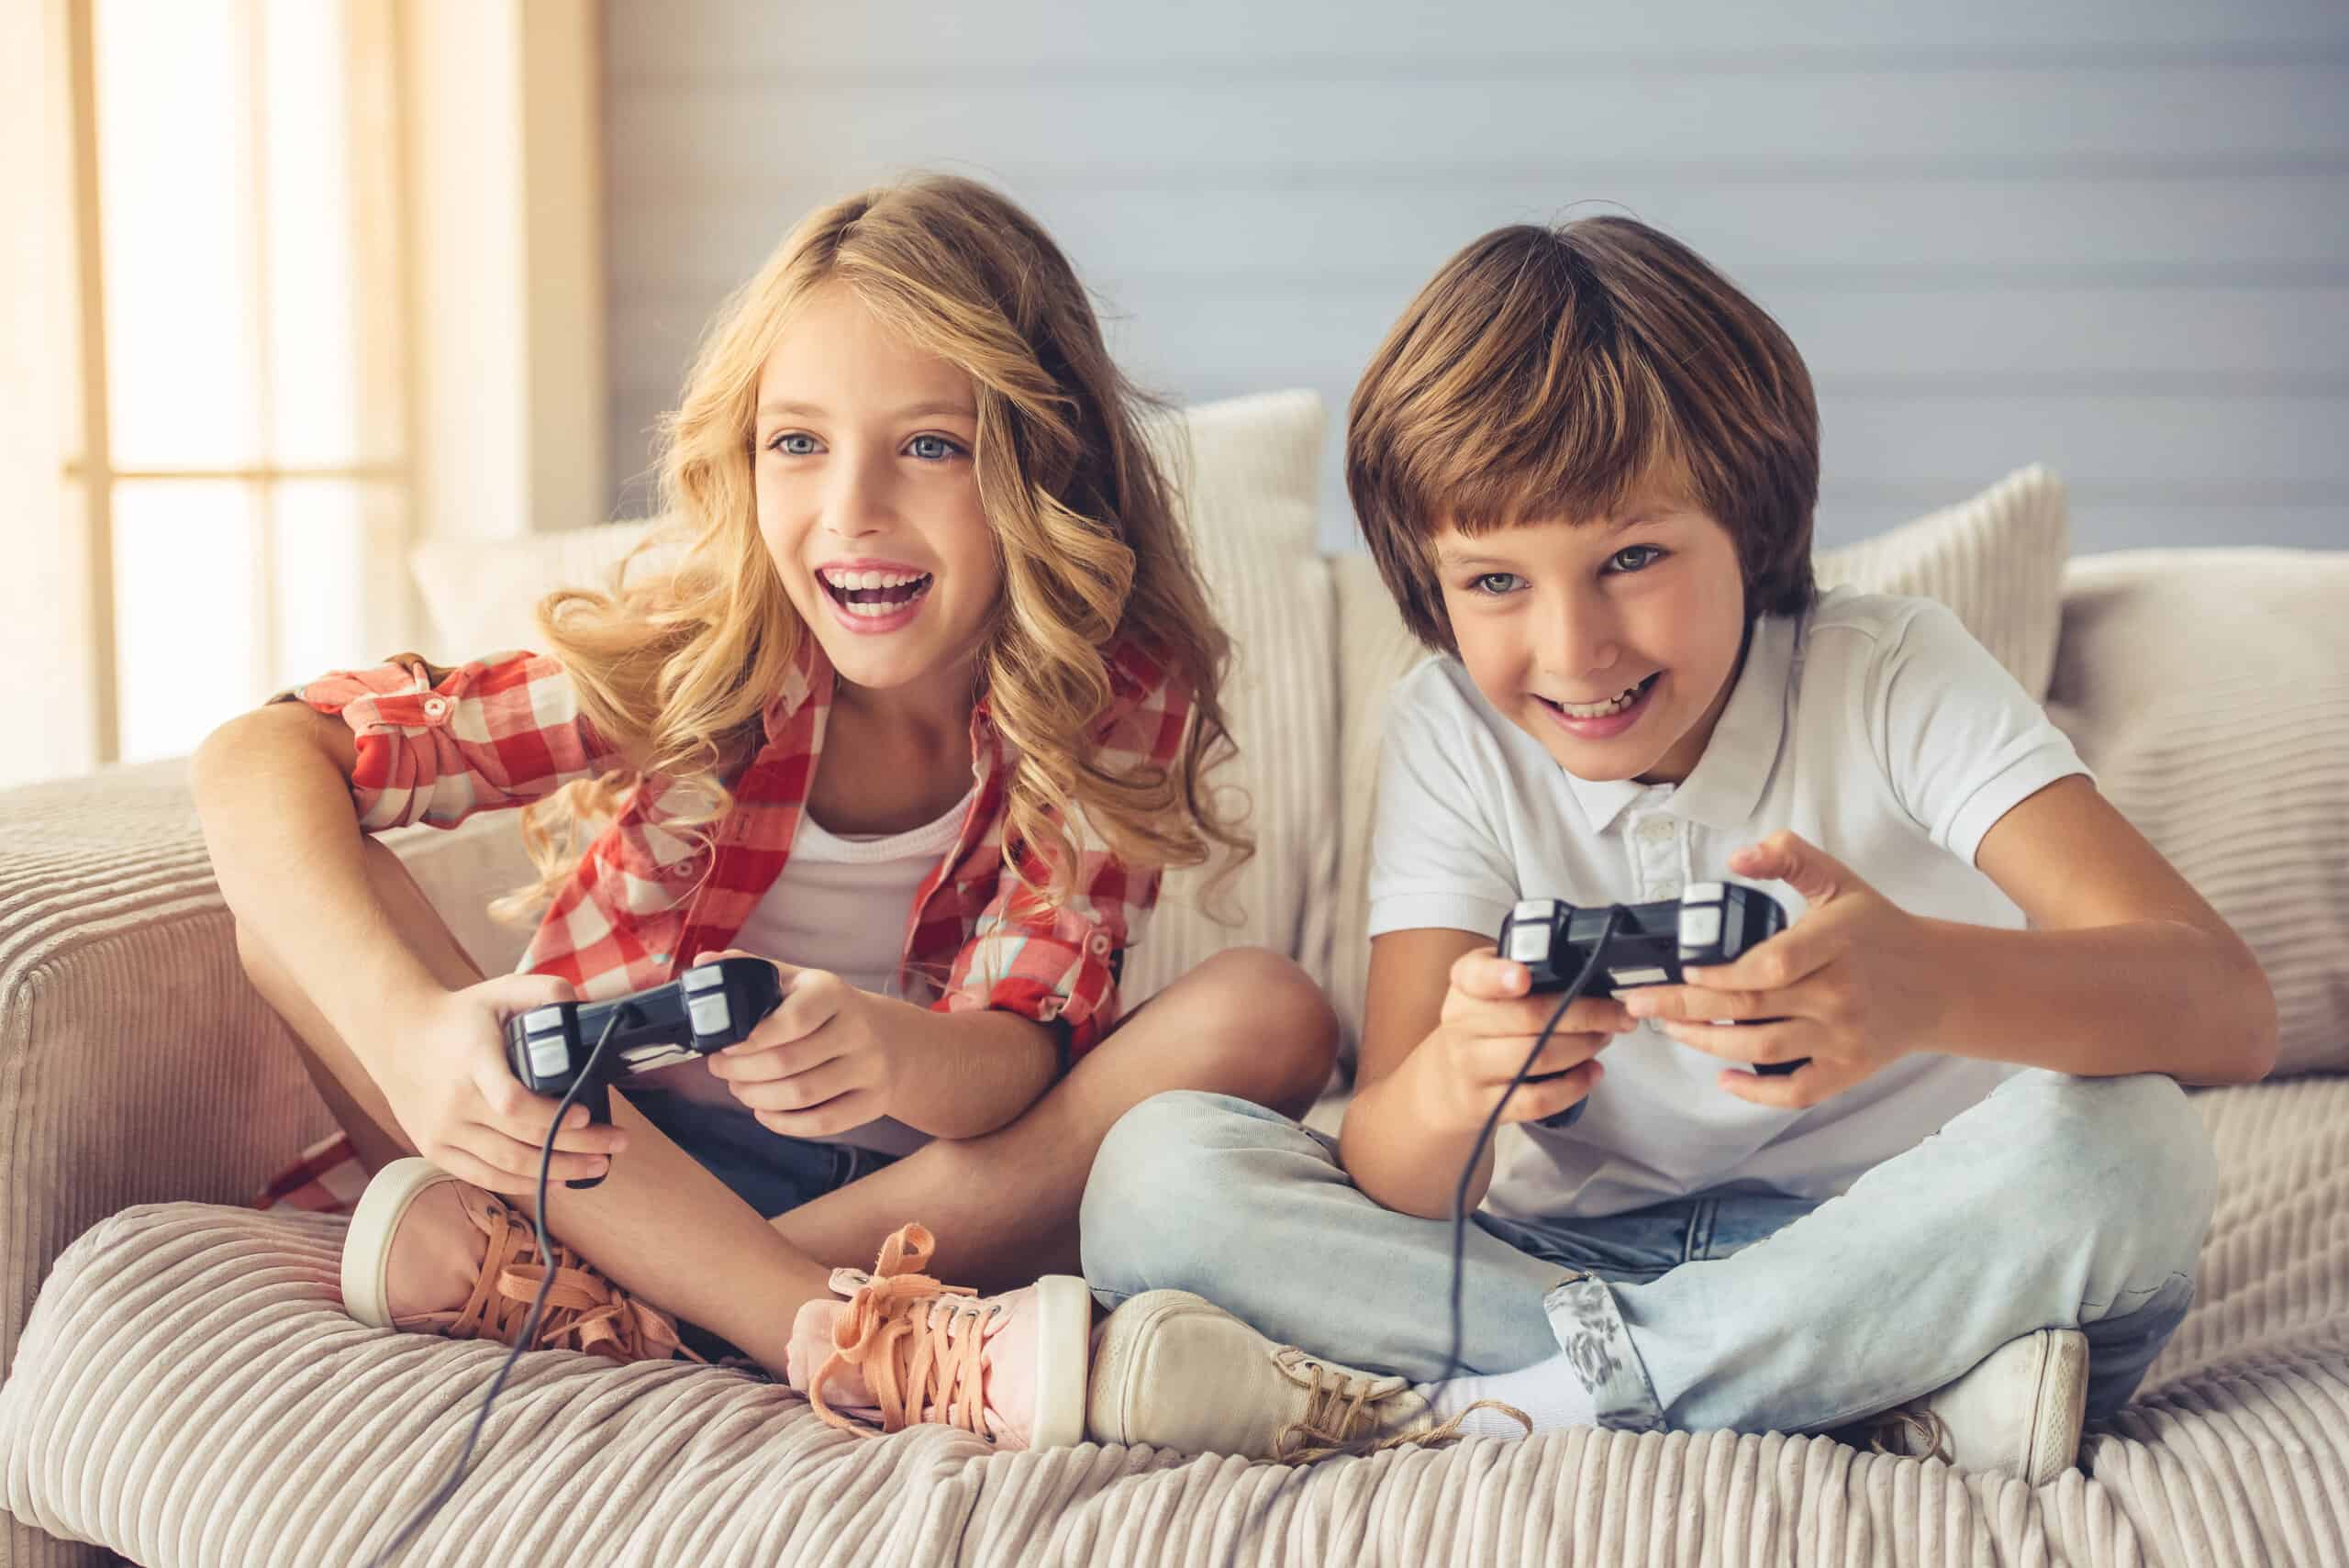 Girl and boy holding game remotes playing video game